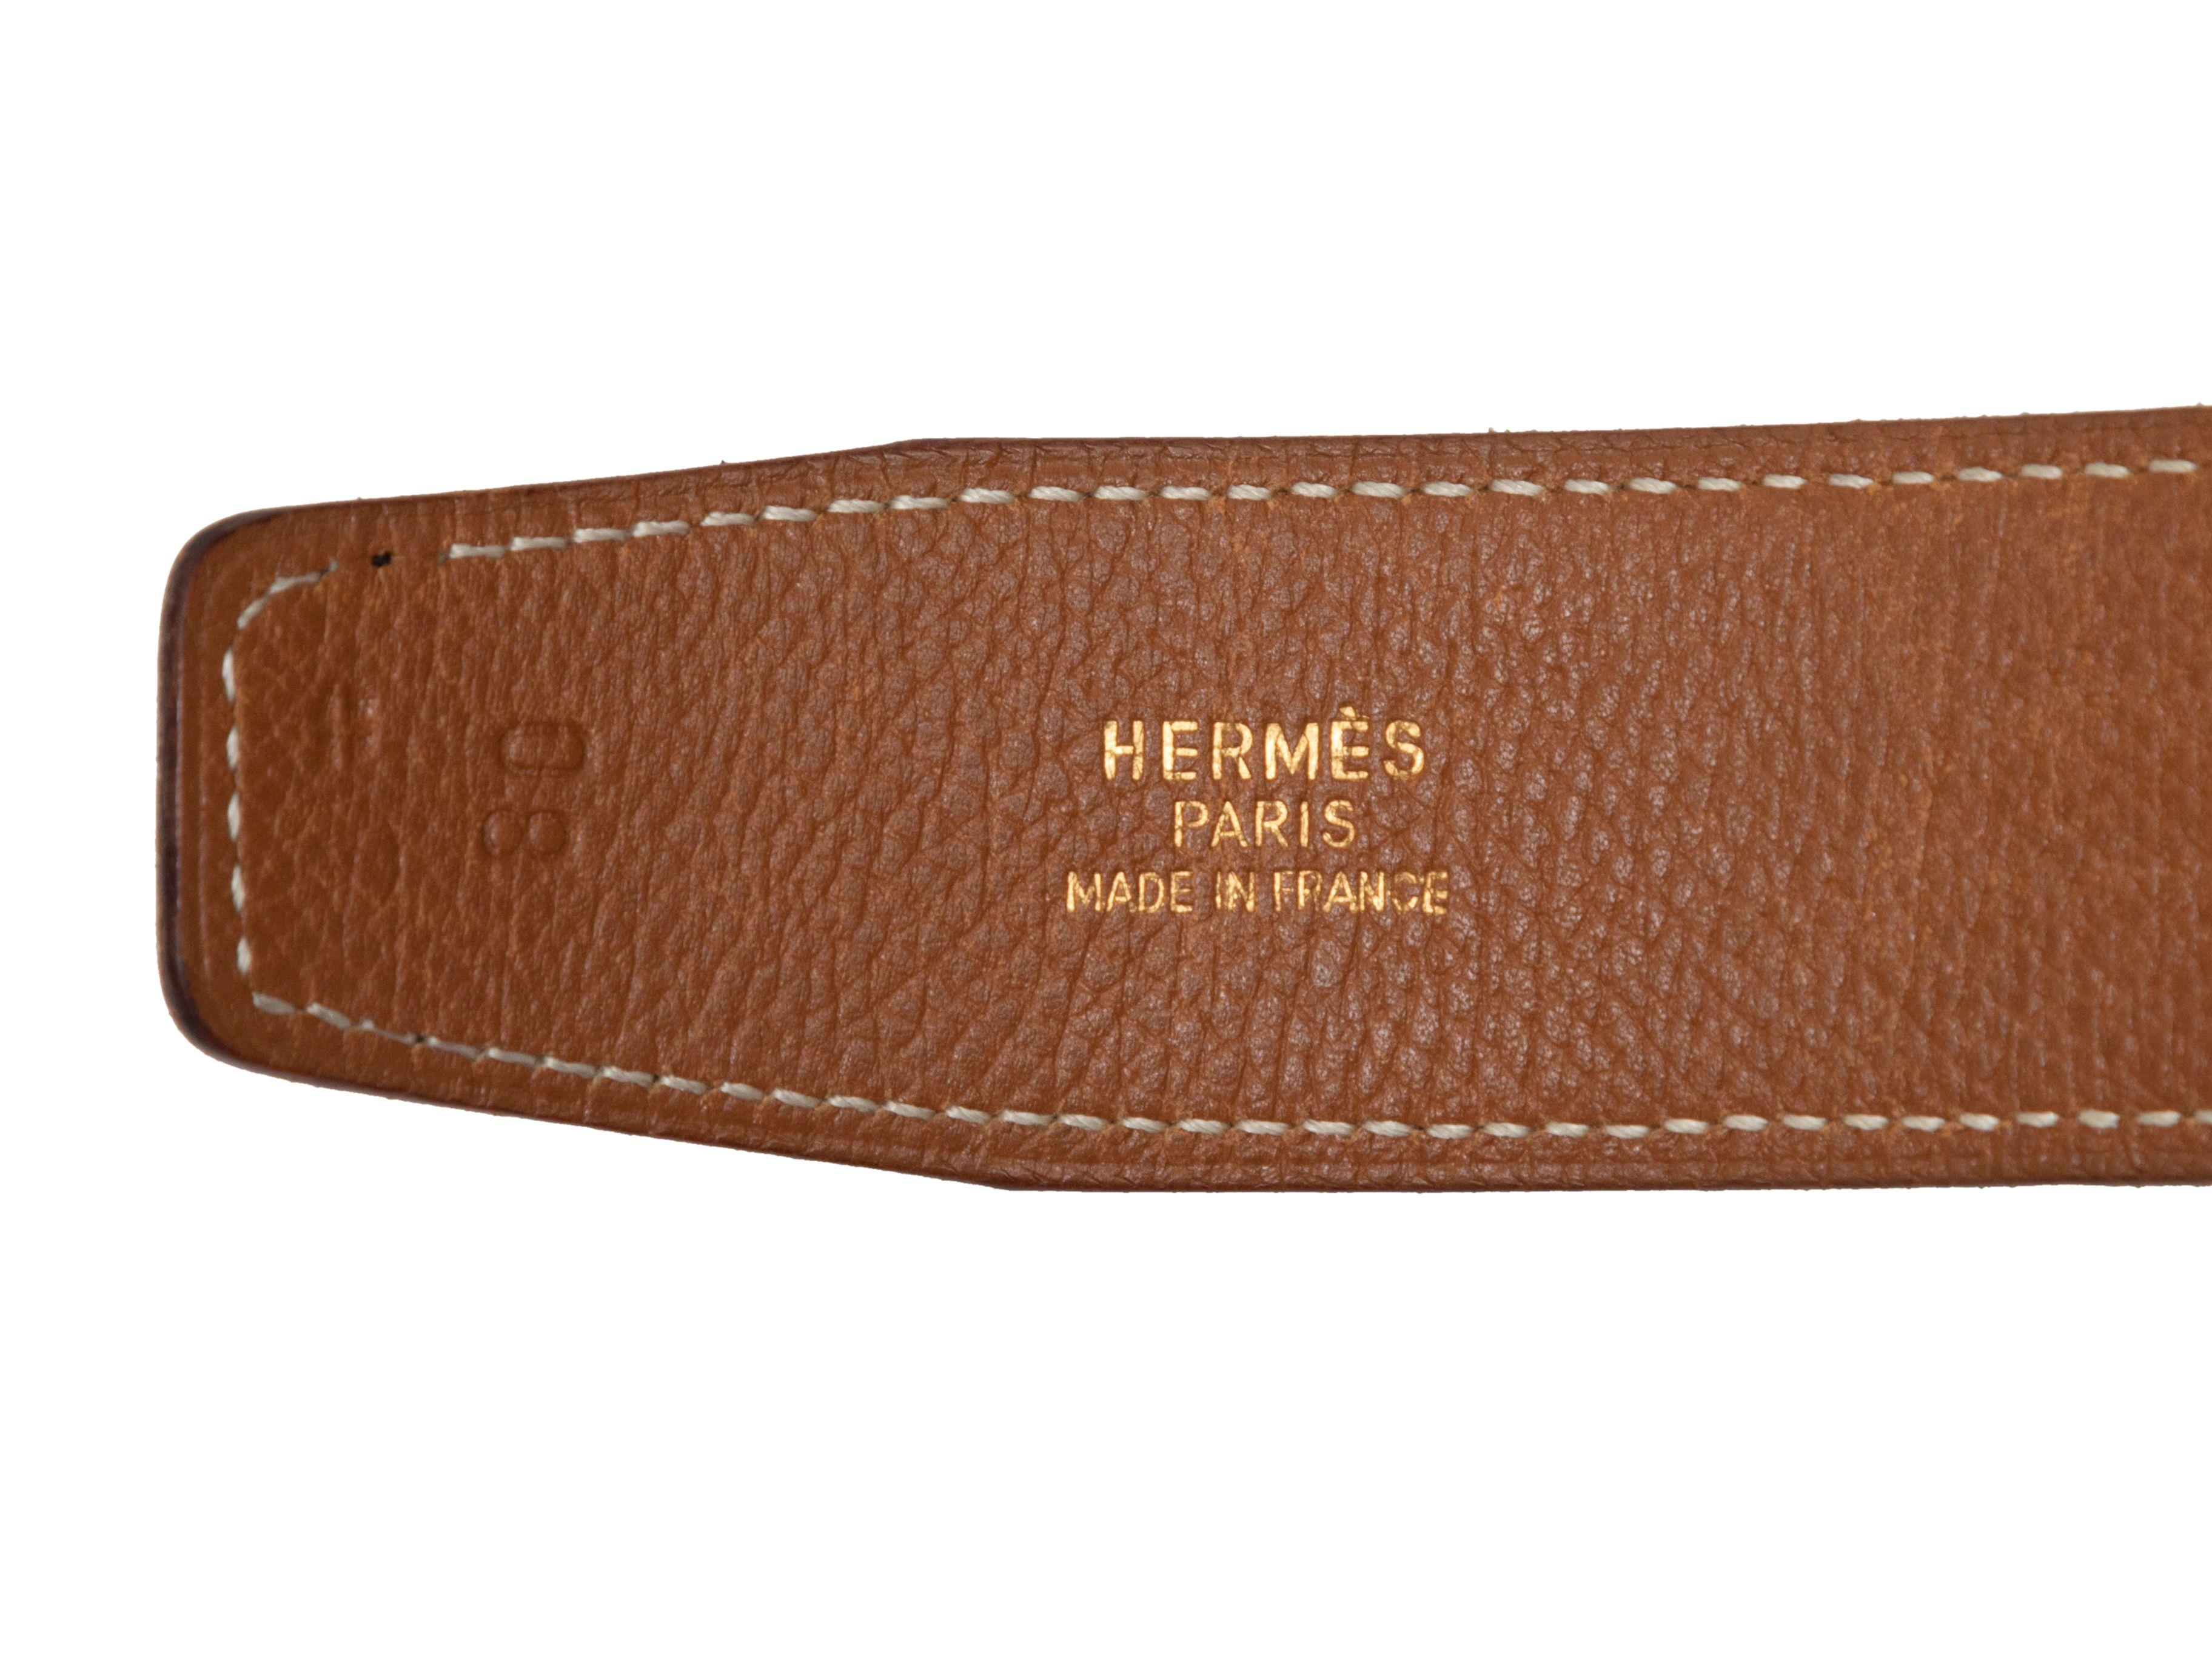 Product Details: Black and brown leather reversible belt by Hermes. Gold-tone hardware. Peg-in-hole closure. 1.25